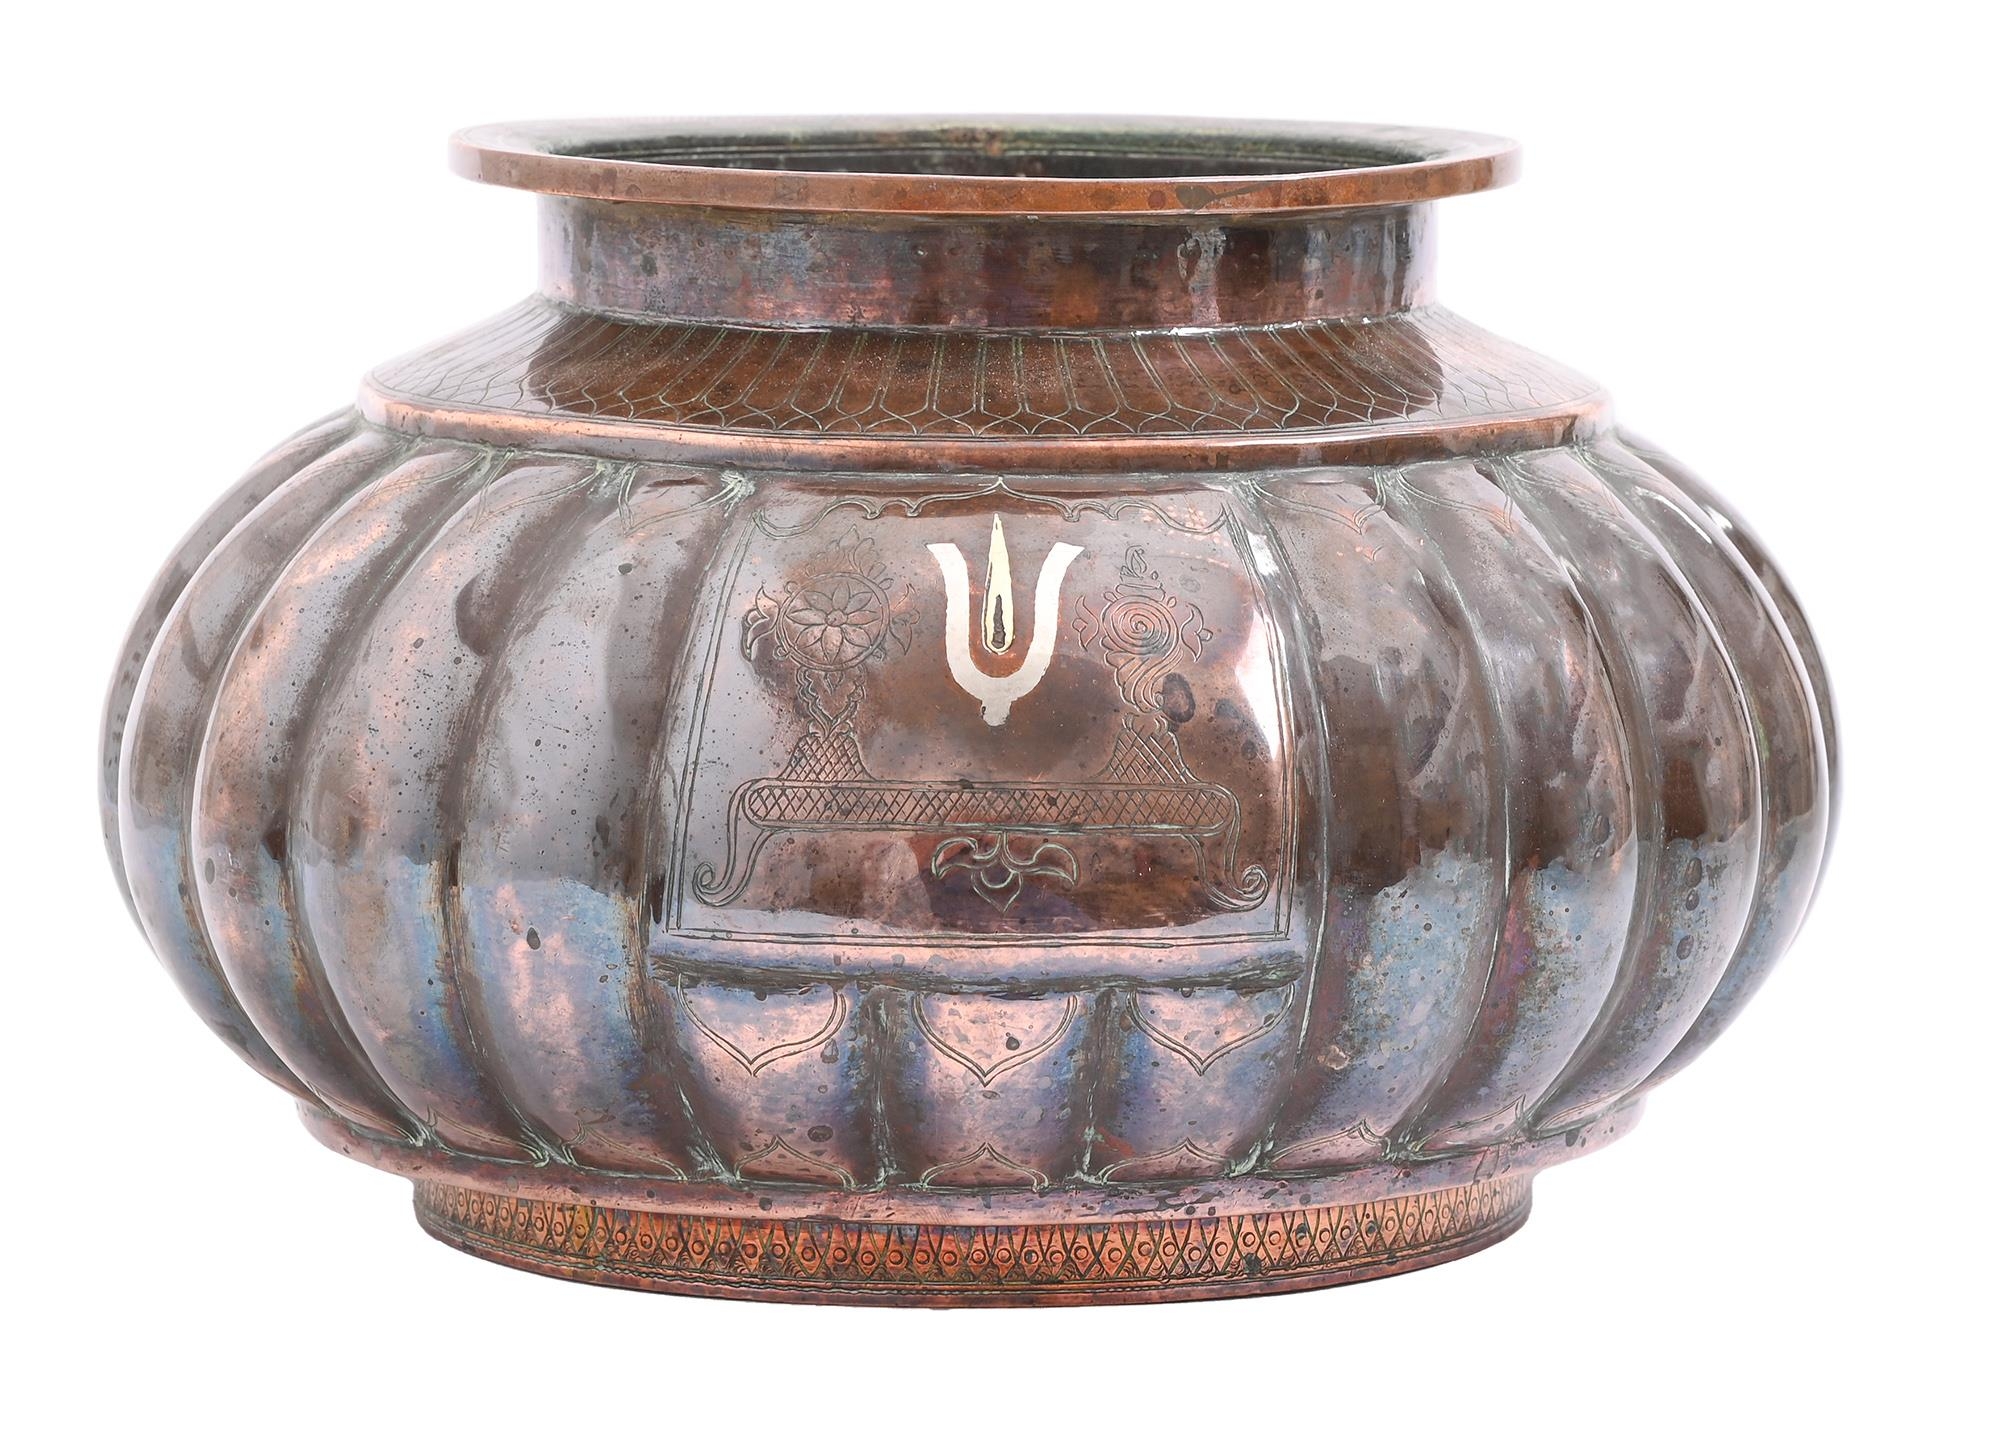 An Indian inlaid and engraved copper vessel, Lota, early 20th c, of compressed, lobed form with